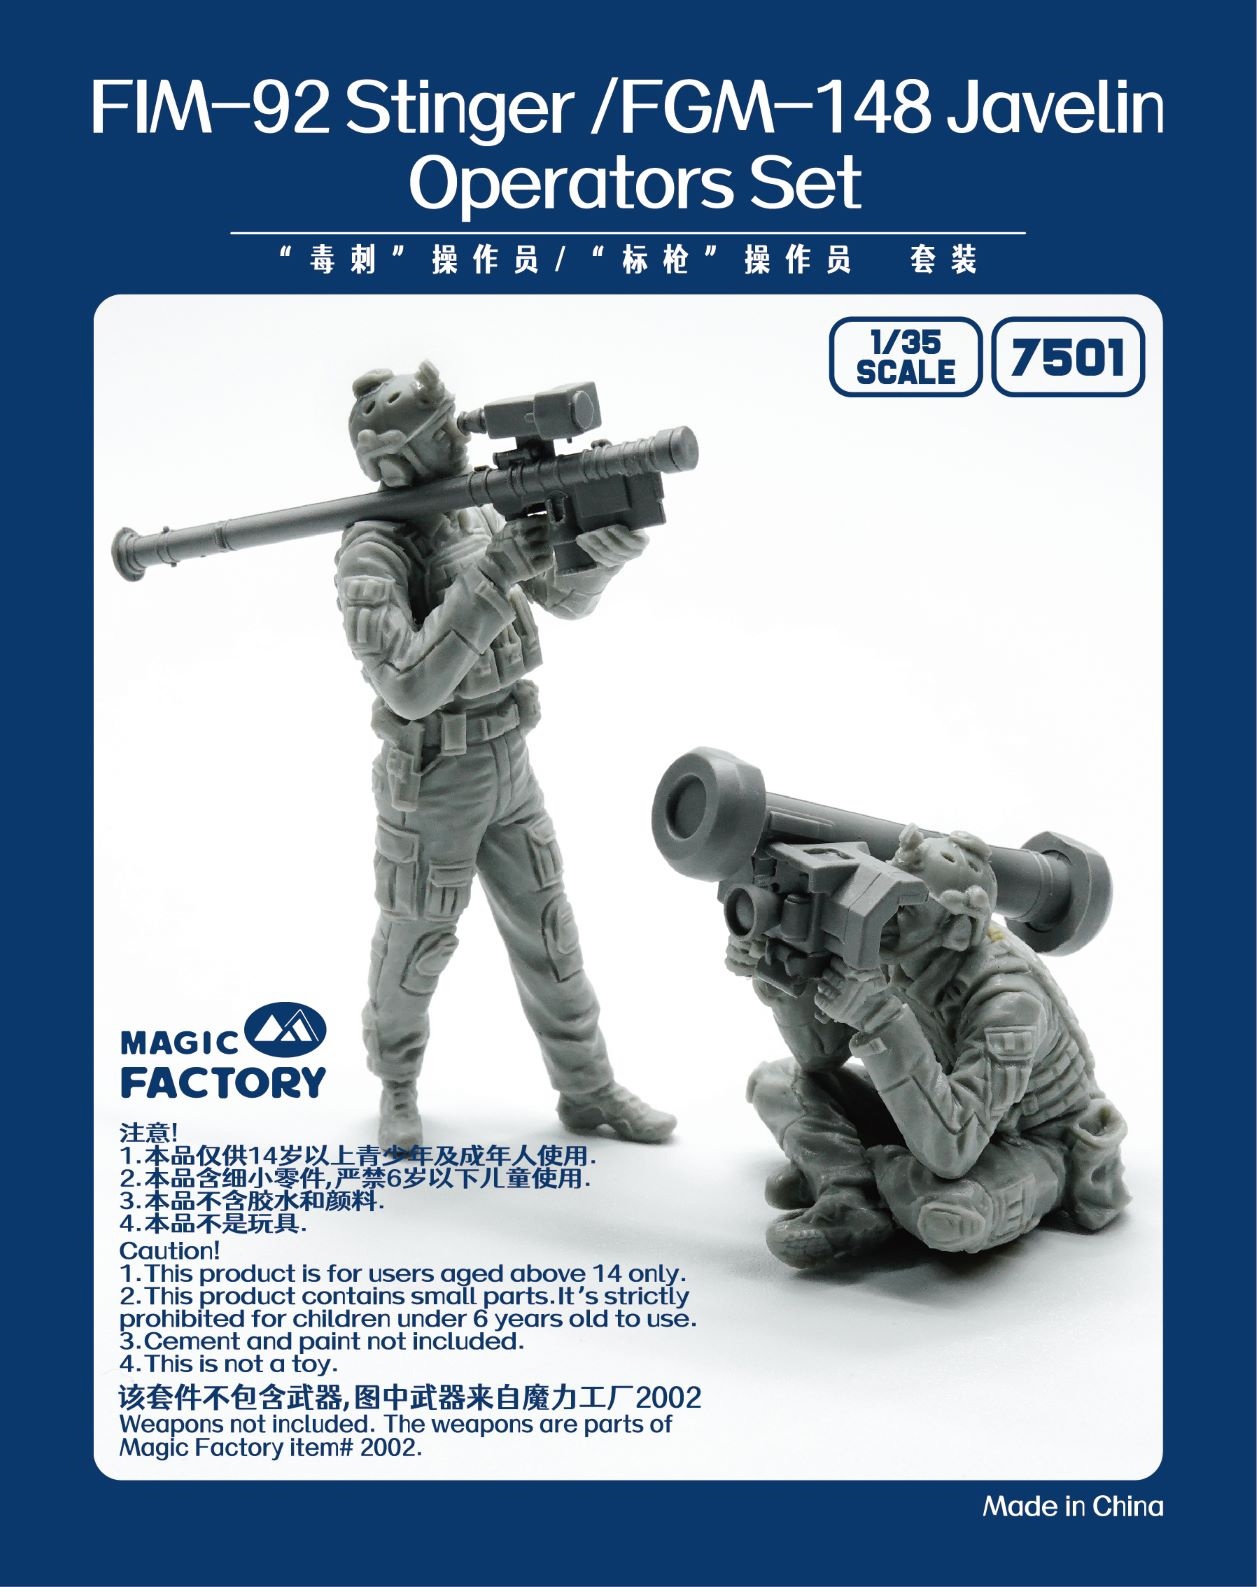 7501  фигуры  FIM-92 Stinger/FGM-148 Javelin Operators for Magic Factory 2002 (Weapons not included)